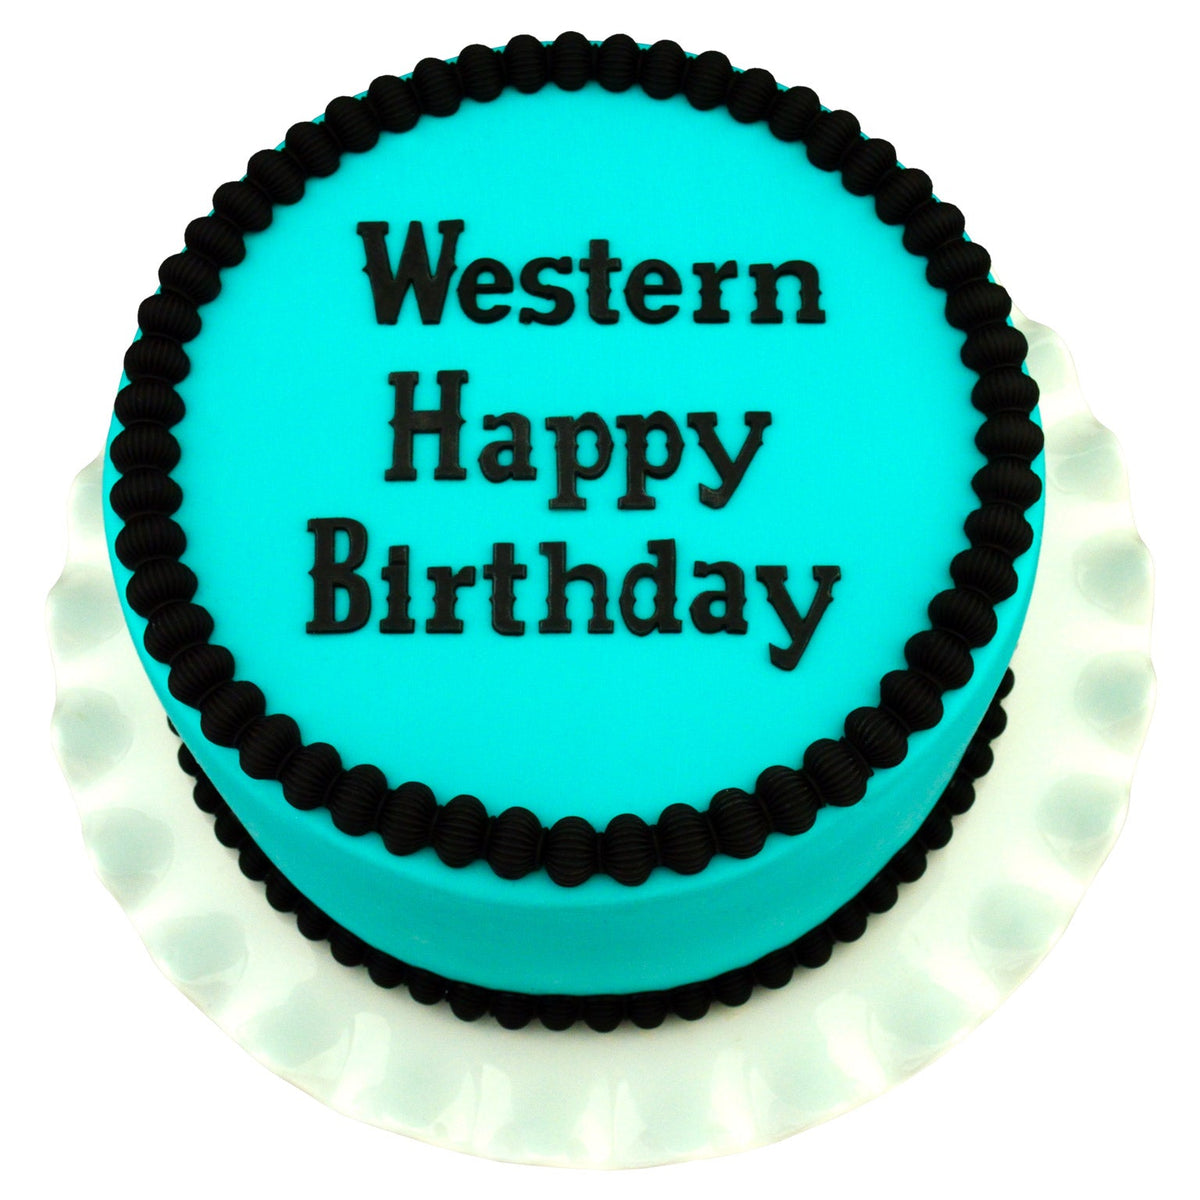 Decorated Cake using Western Happy Birthday Flexabet Food Safe Silicone Letter Maker by Marvelous Molds